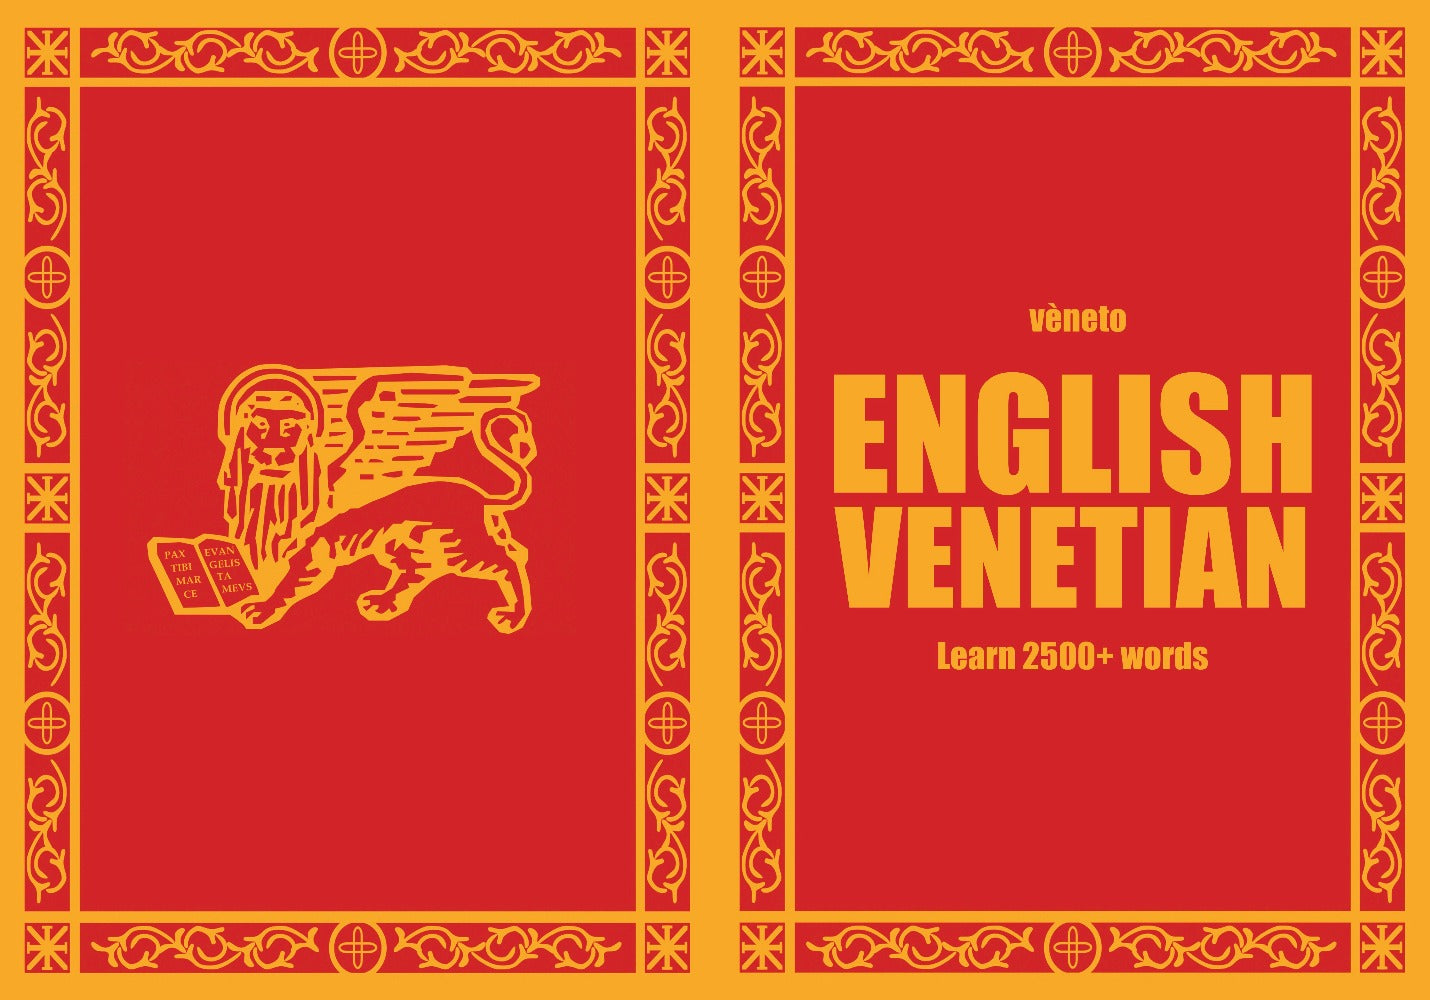 Venetian language learning notebook cover